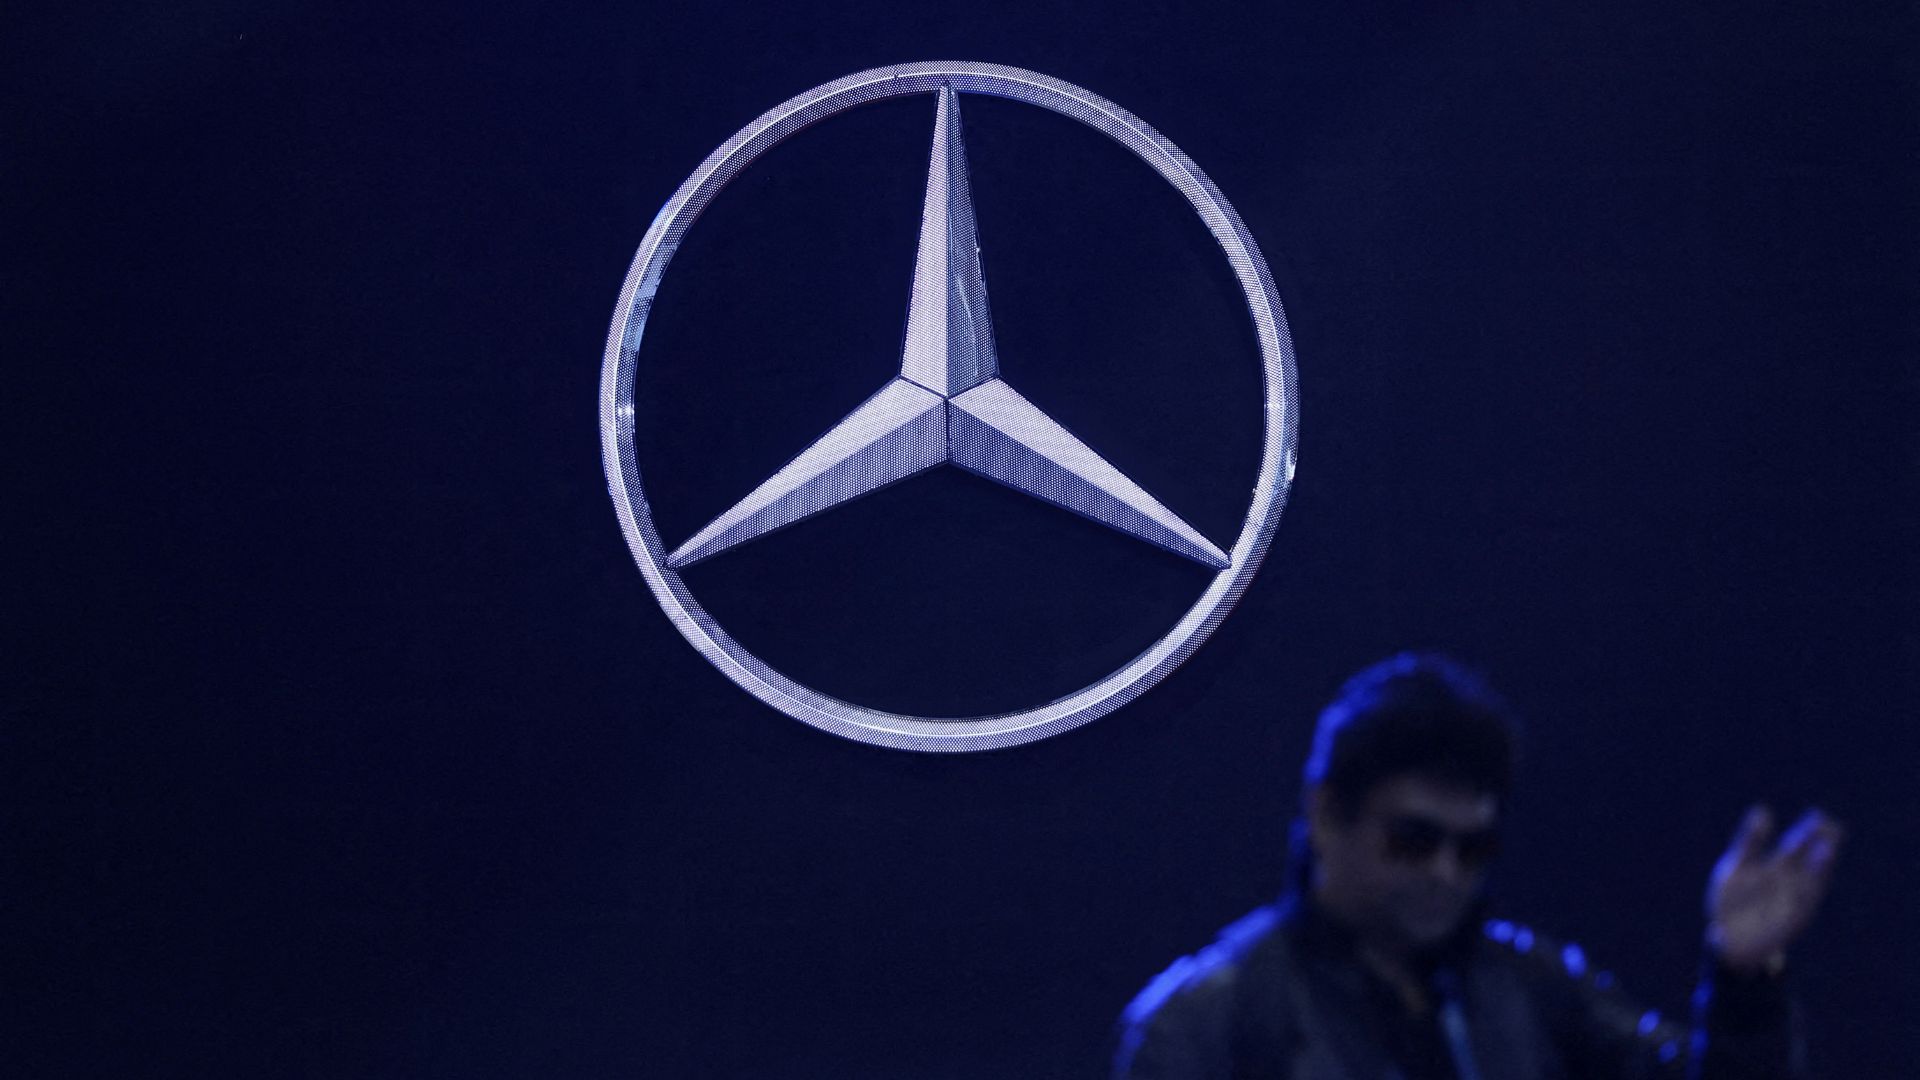 The Mercedes CEO says the company has to focus on their own strategy despite growing competition. /Anushree Fadnavis/File/Reuters